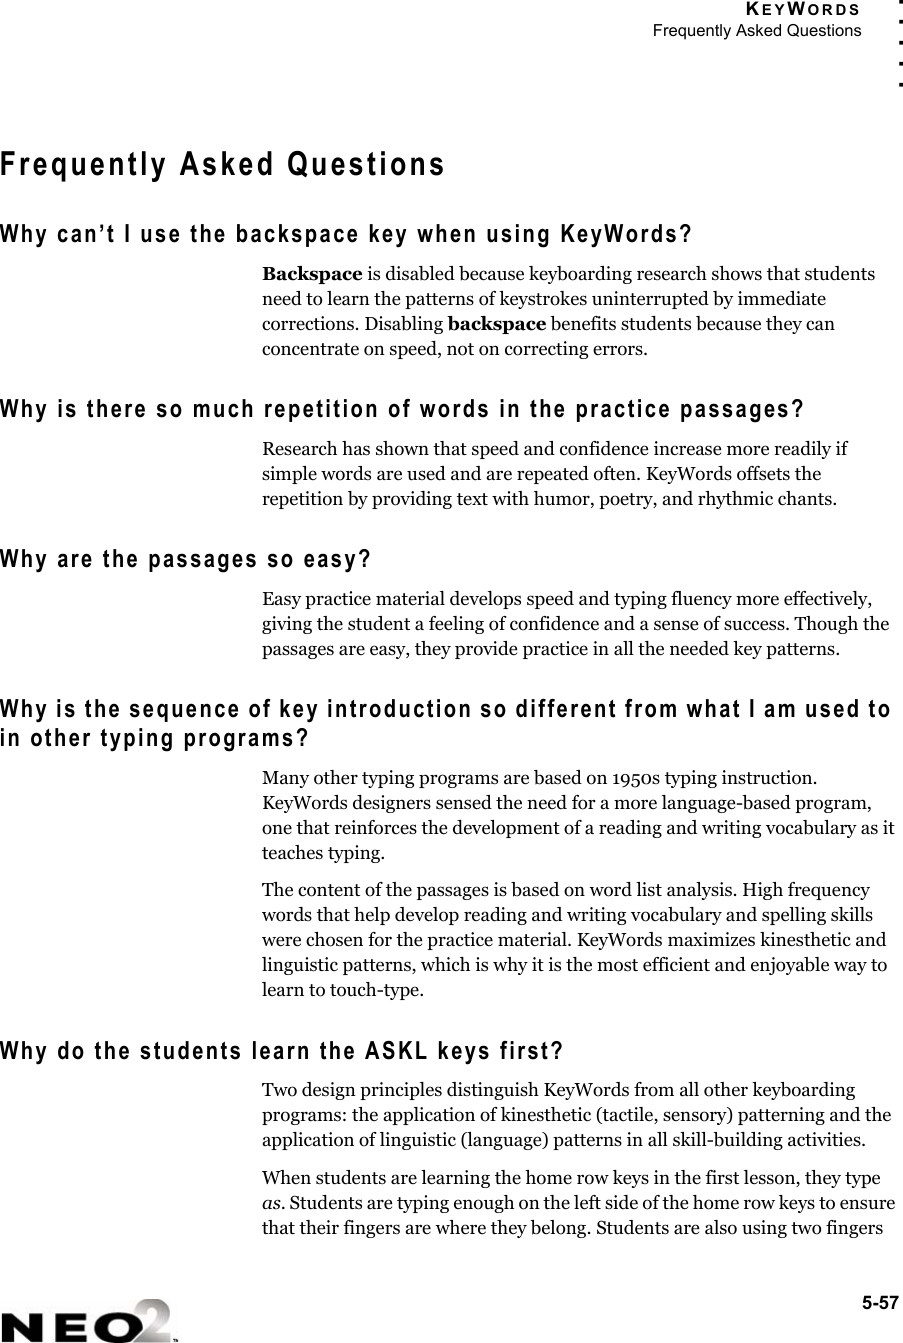 KEYWORDSFrequently Asked Questions5-57. . . . .Frequently Asked QuestionsWhy can’t I use the backspace key when using KeyWords?Backspace is disabled because keyboarding research shows that students need to learn the patterns of keystrokes uninterrupted by immediate corrections. Disabling backspace benefits students because they can concentrate on speed, not on correcting errors.Why is there so much repetition of words in the practice passages?Research has shown that speed and confidence increase more readily if simple words are used and are repeated often. KeyWords offsets the repetition by providing text with humor, poetry, and rhythmic chants.Why are the passages so easy?Easy practice material develops speed and typing fluency more effectively, giving the student a feeling of confidence and a sense of success. Though the passages are easy, they provide practice in all the needed key patterns.Why is the sequence of key introduction so different from what I am used to in other typing programs?Many other typing programs are based on 1950s typing instruction. KeyWords designers sensed the need for a more language-based program, one that reinforces the development of a reading and writing vocabulary as it teaches typing.The content of the passages is based on word list analysis. High frequency words that help develop reading and writing vocabulary and spelling skills were chosen for the practice material. KeyWords maximizes kinesthetic and linguistic patterns, which is why it is the most efficient and enjoyable way to learn to touch-type.Why do the students learn the ASKL keys first?Two design principles distinguish KeyWords from all other keyboarding programs: the application of kinesthetic (tactile, sensory) patterning and the application of linguistic (language) patterns in all skill-building activities. When students are learning the home row keys in the first lesson, they type as. Students are typing enough on the left side of the home row keys to ensure that their fingers are where they belong. Students are also using two fingers 